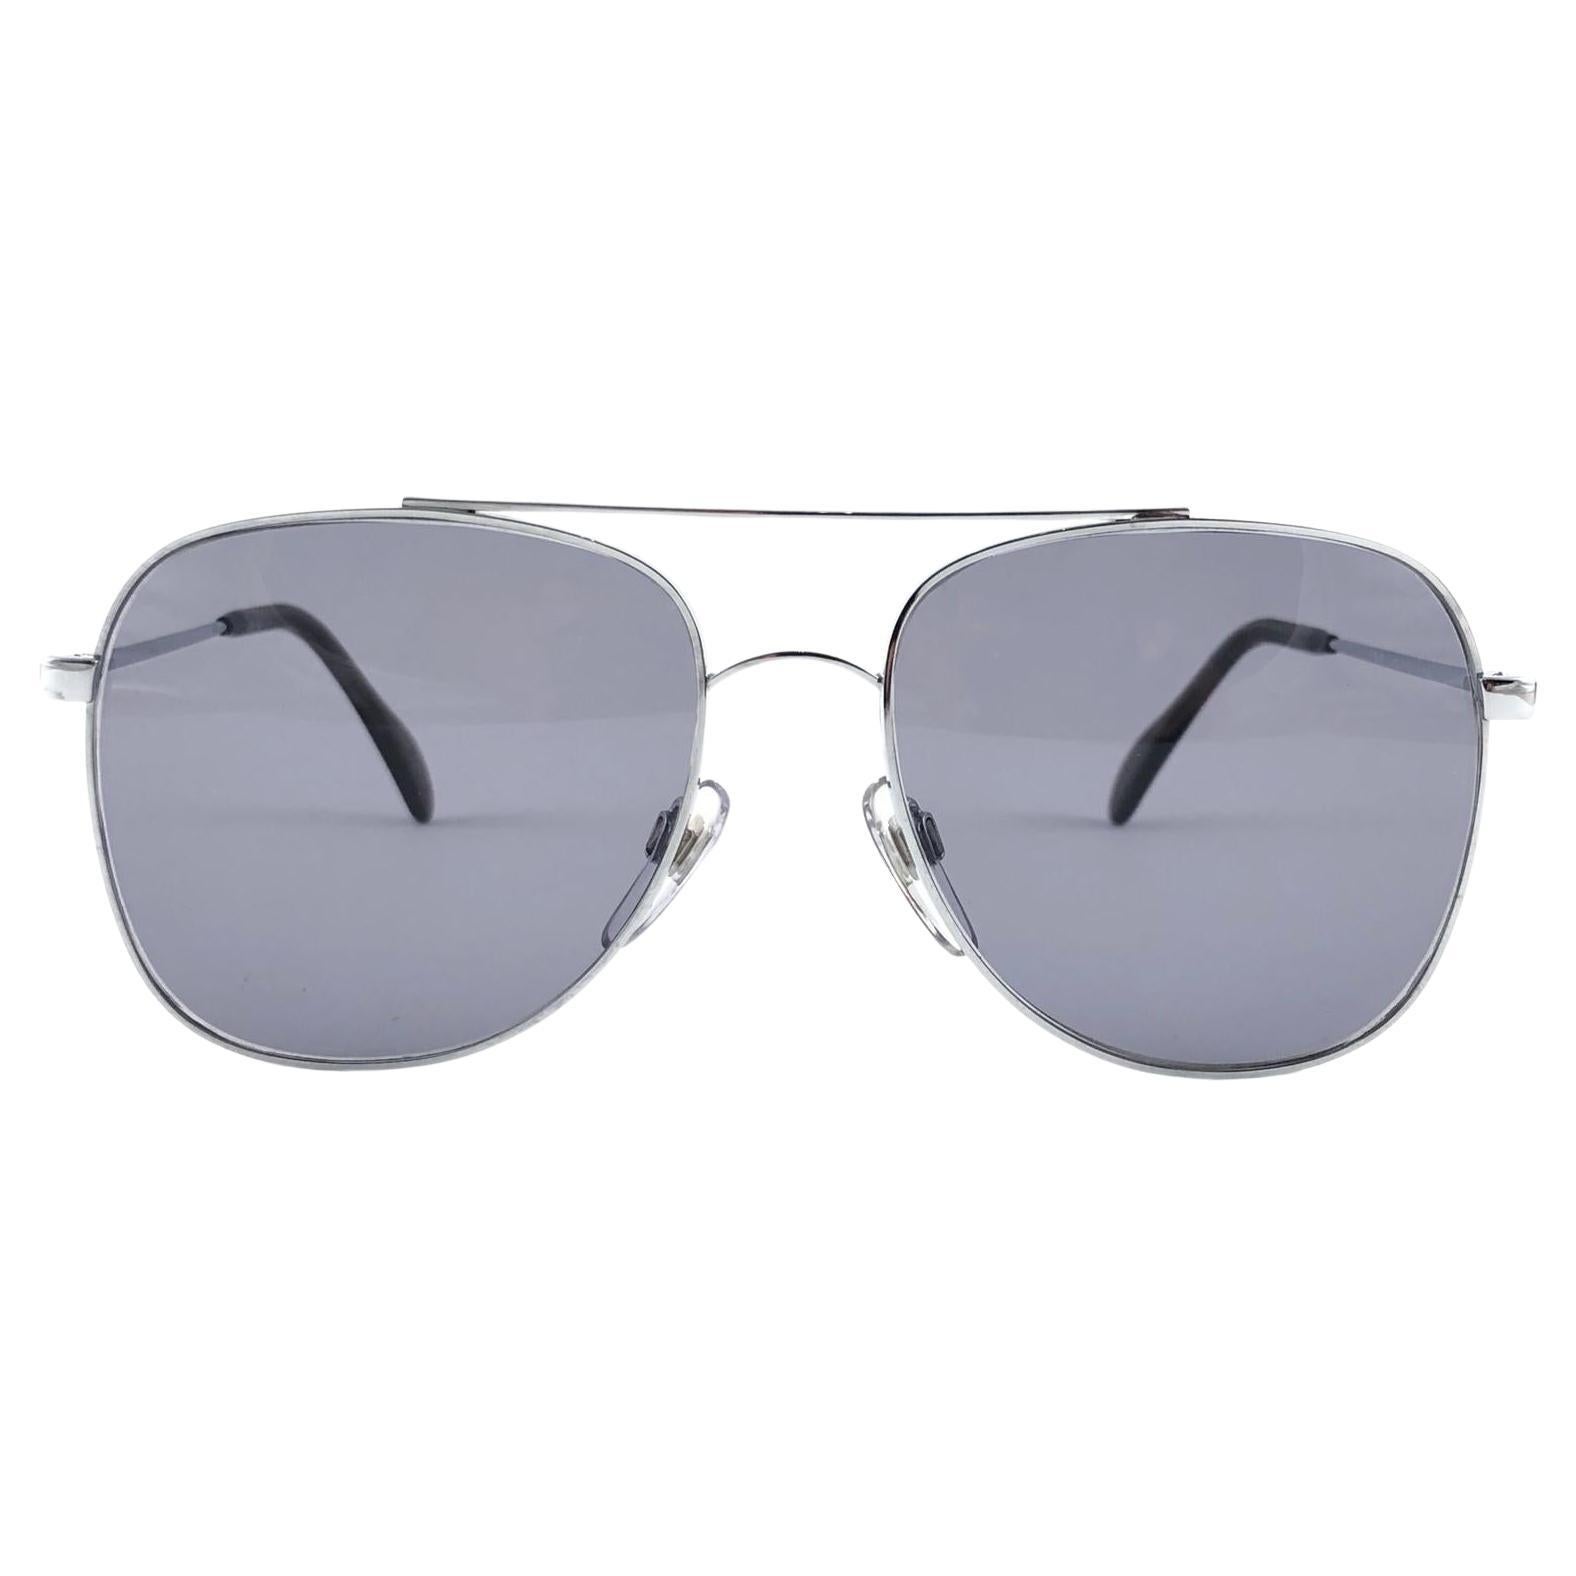 New Vintage Menrad M353 Silver Aviator  Made in Germany 1970 Sunglasses  For Sale